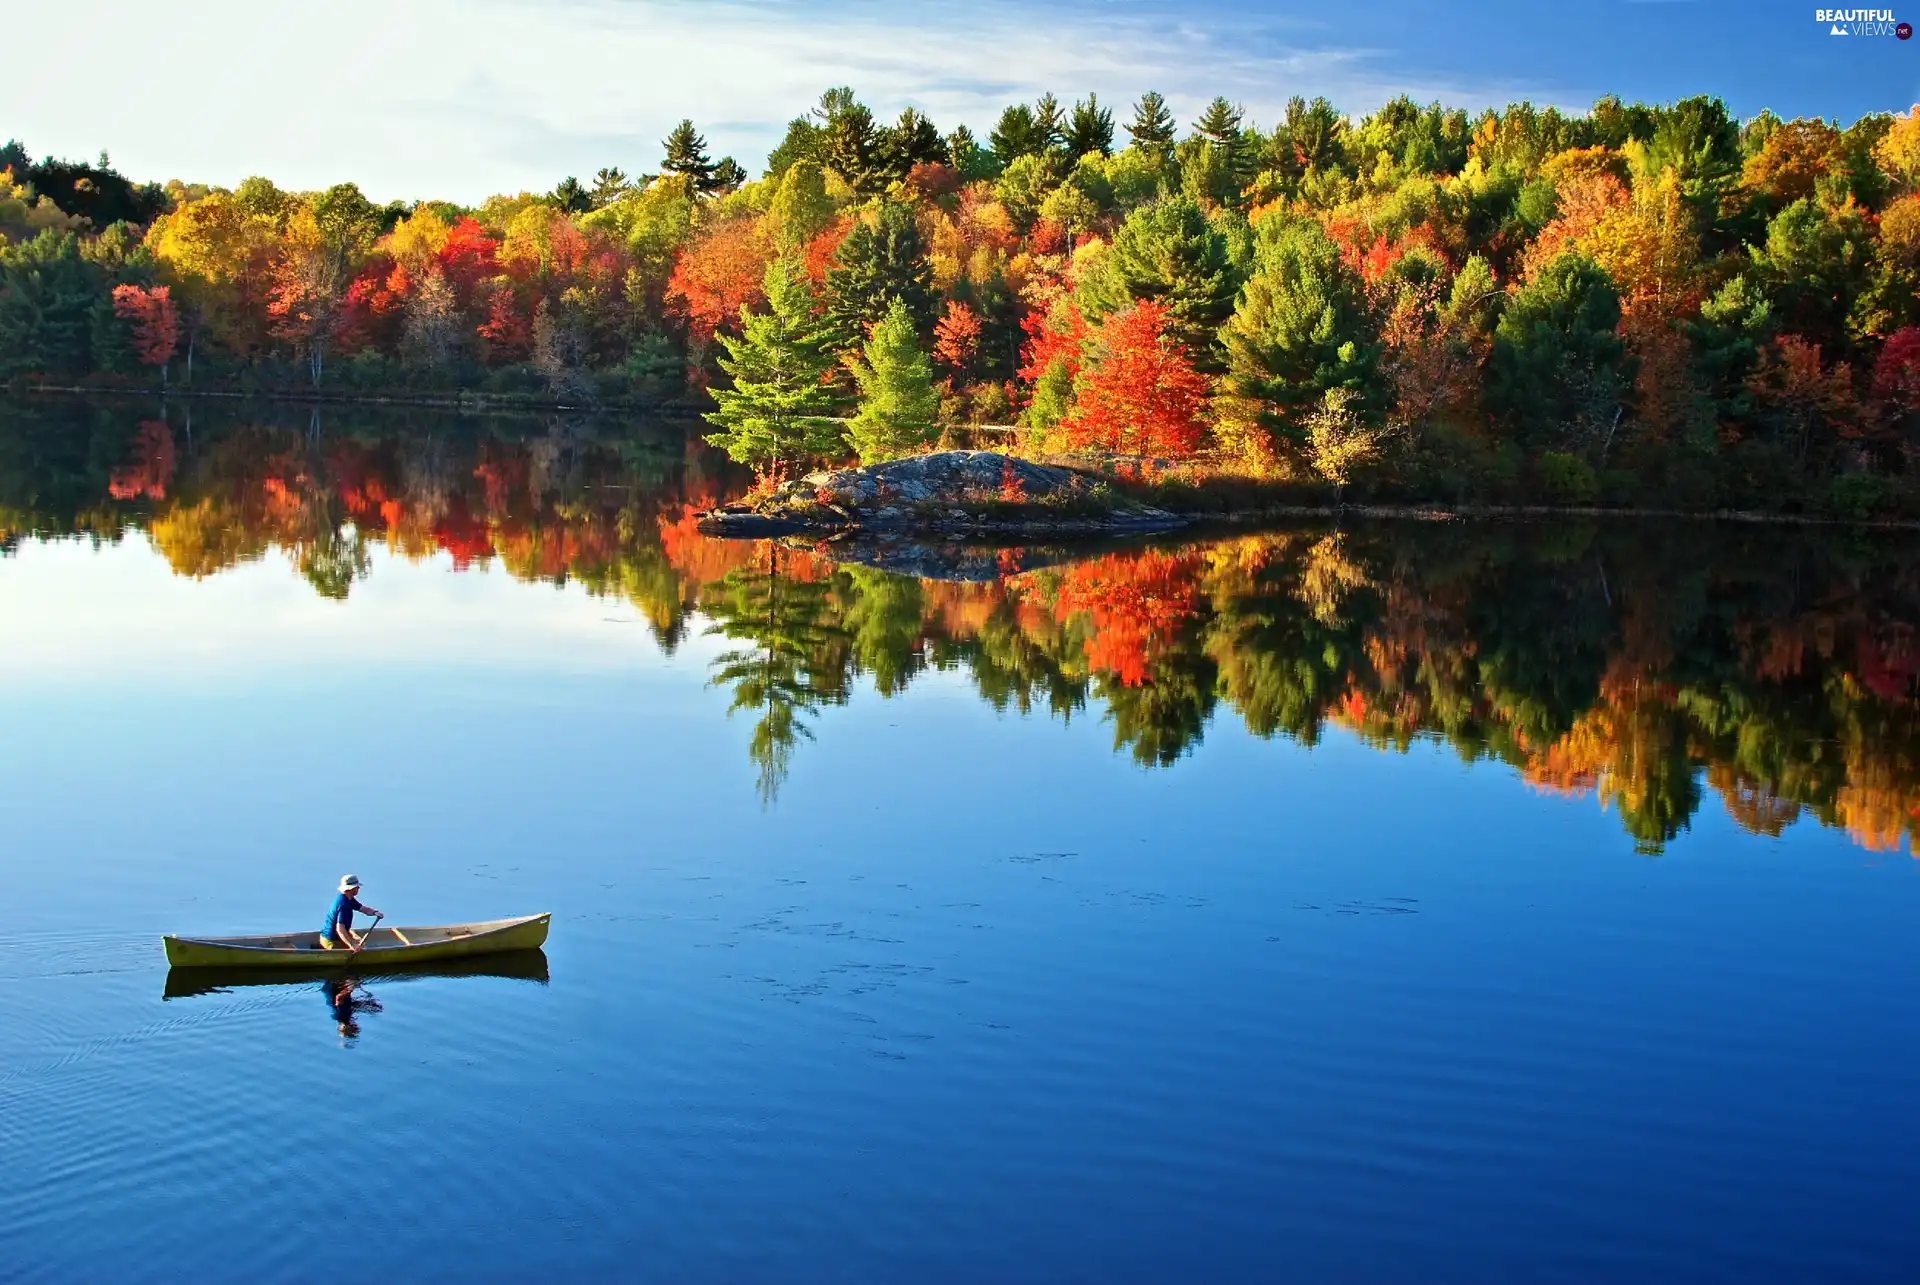 Boat, forest, autumn, lake